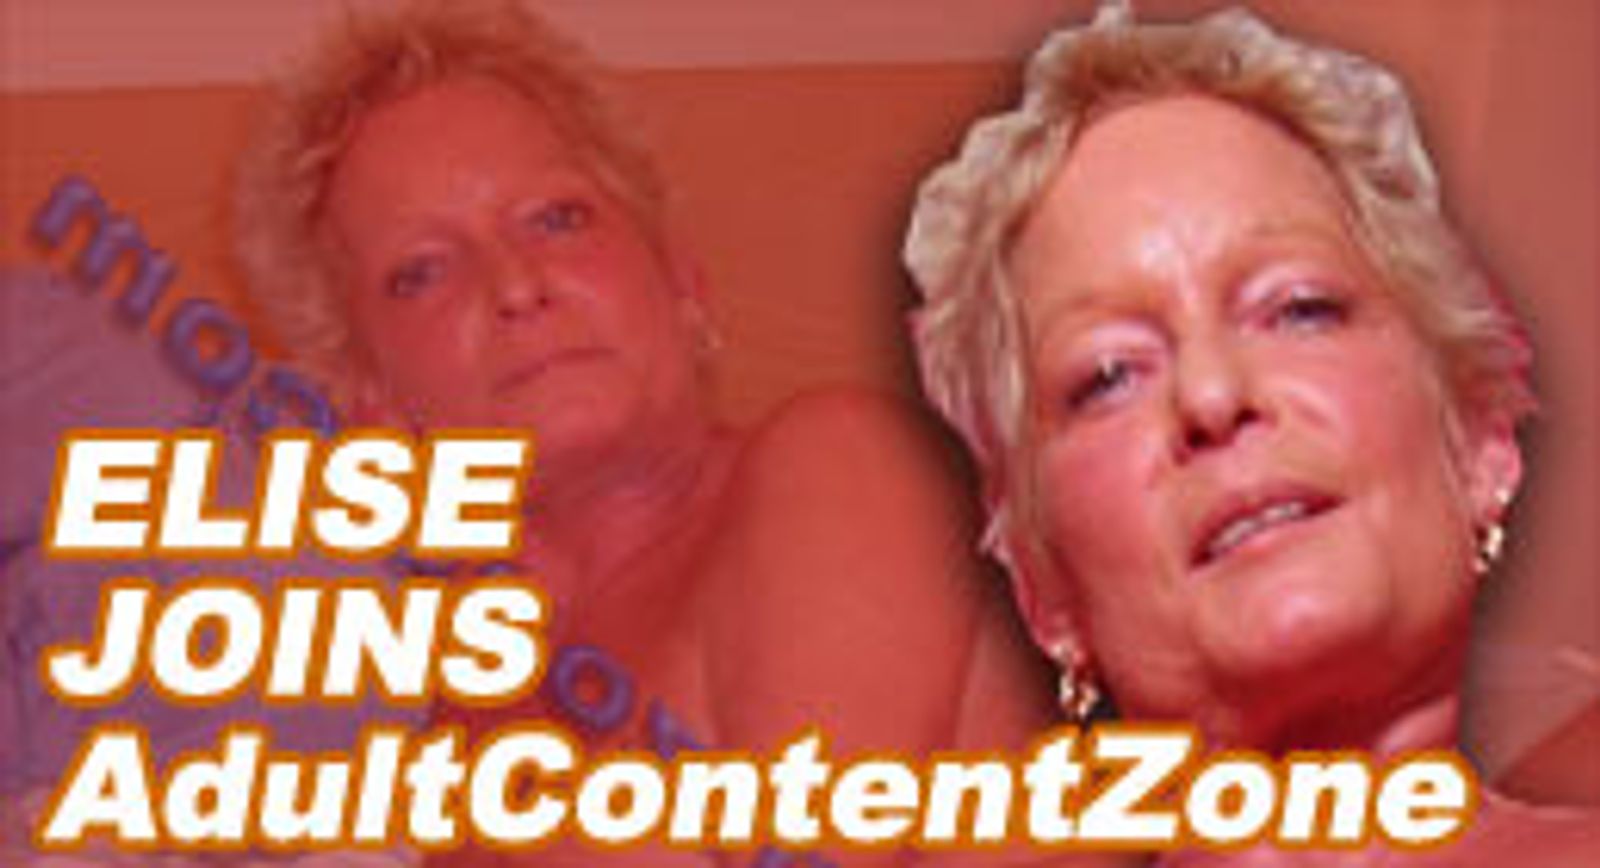 Elise Joins AdultContentZone's Mature Lineup